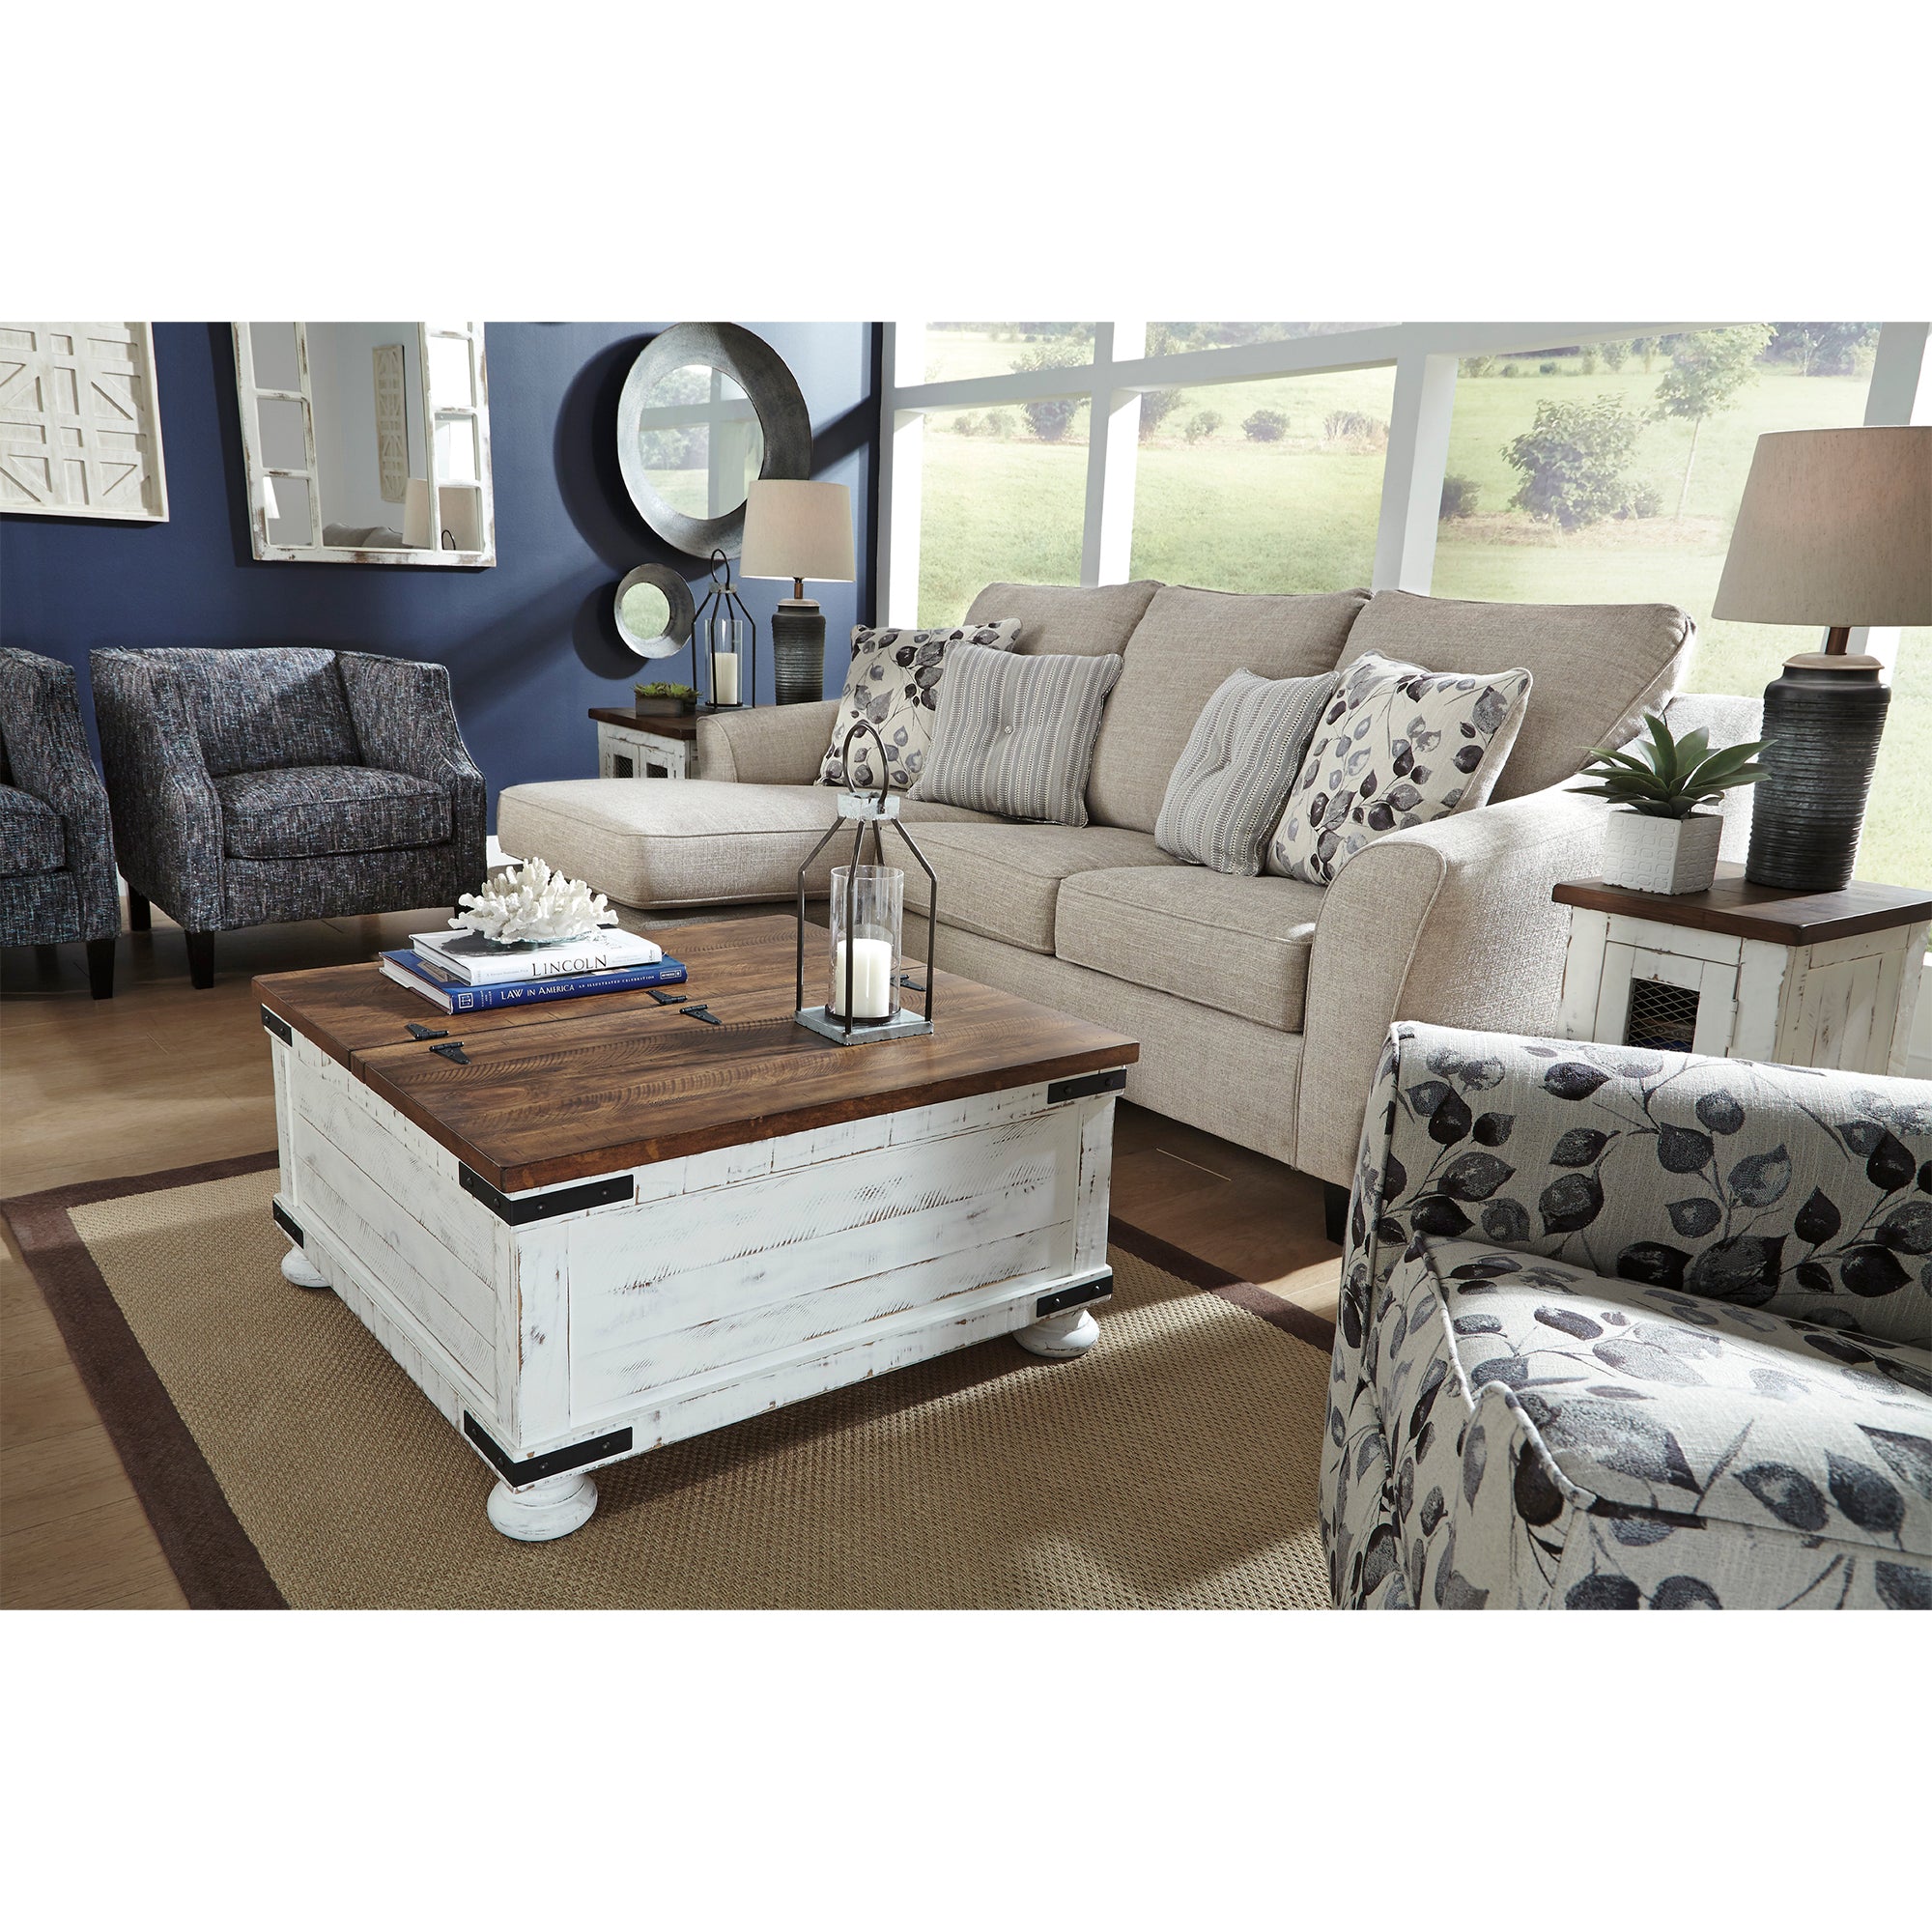 Abney Sofa Chaise and Swivel Chair